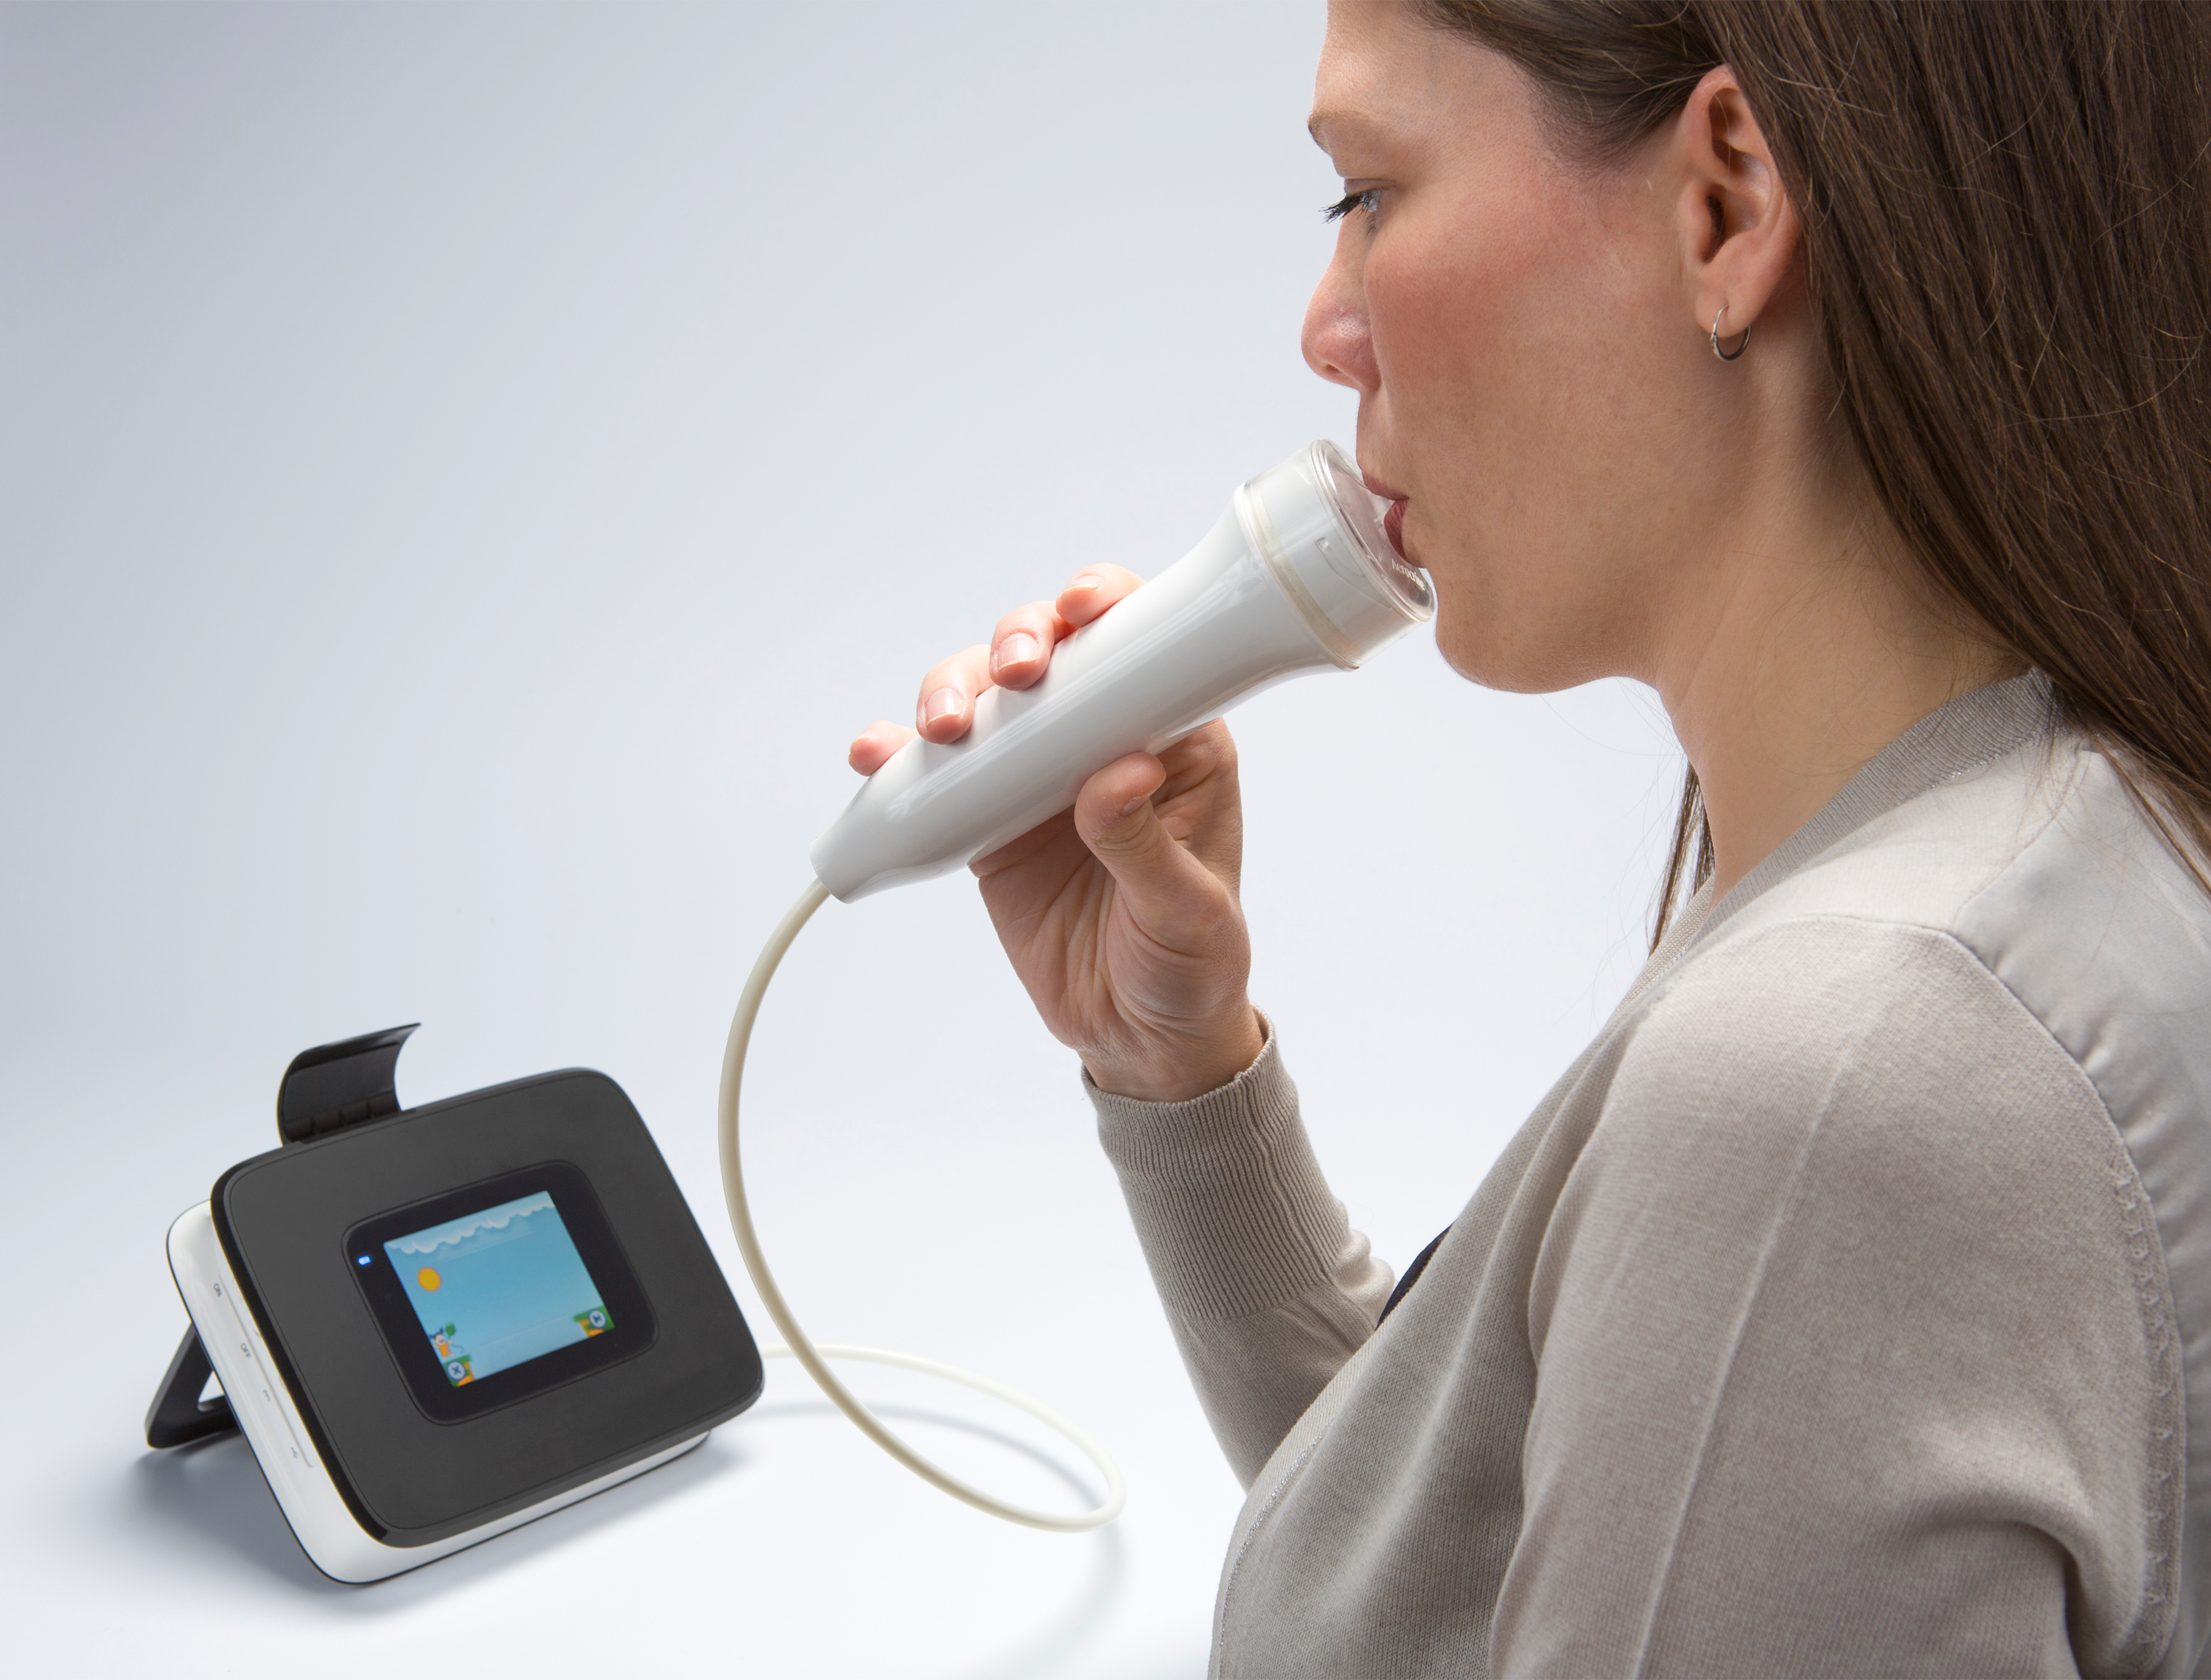 Up to speed: one quick, non-invasive test can help with accurate asthma diagnosis